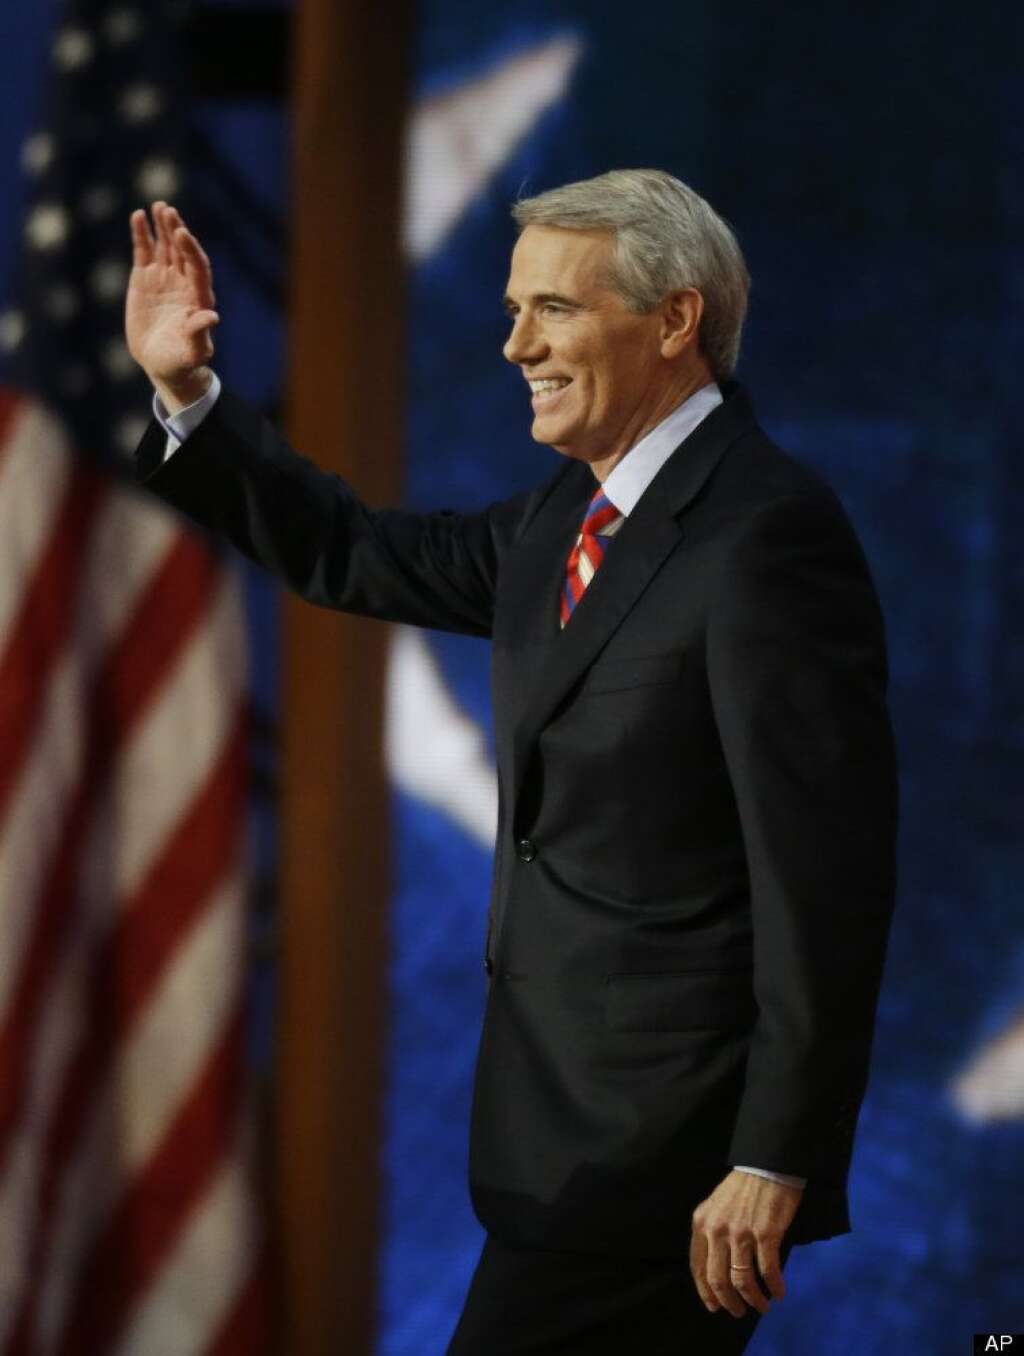 Ohio Senator Rob Portman waves to delegates before his speech during the Republican National Convention in Tampa, Fla., on Wednesday, Aug. 29, 2012. (AP Photo/Lynne Sladky)